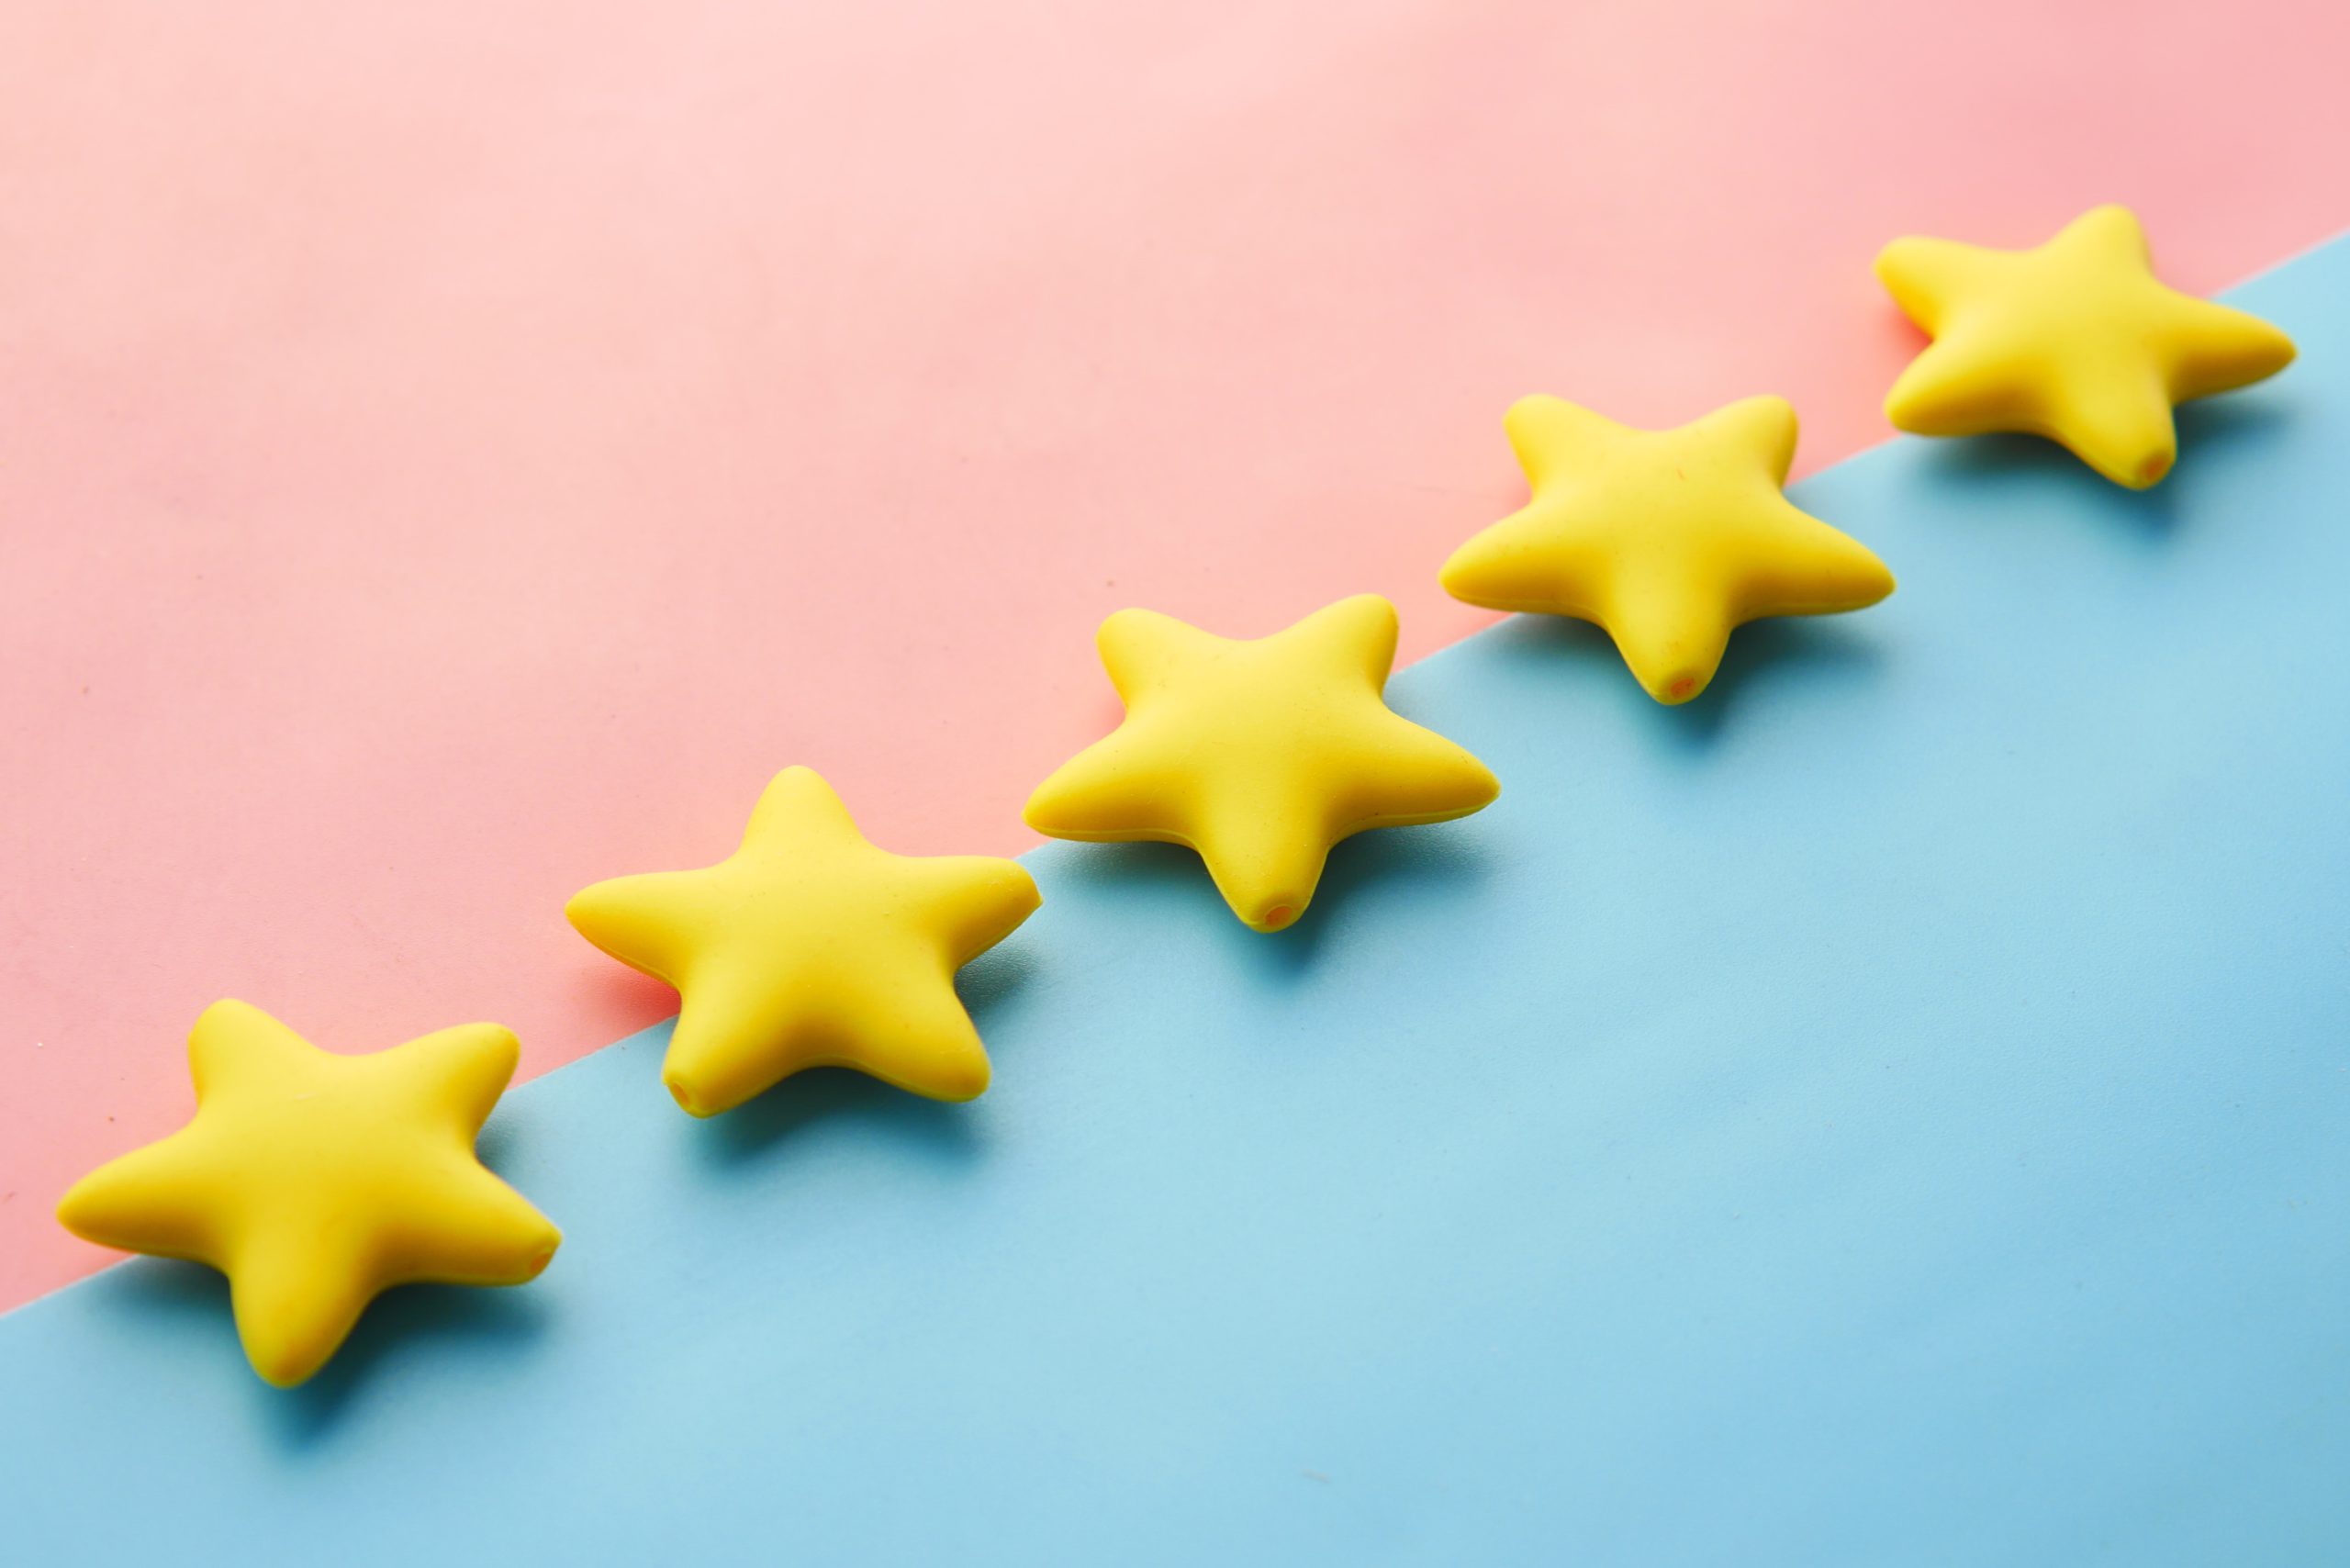 set of five stars on a blue and pink background